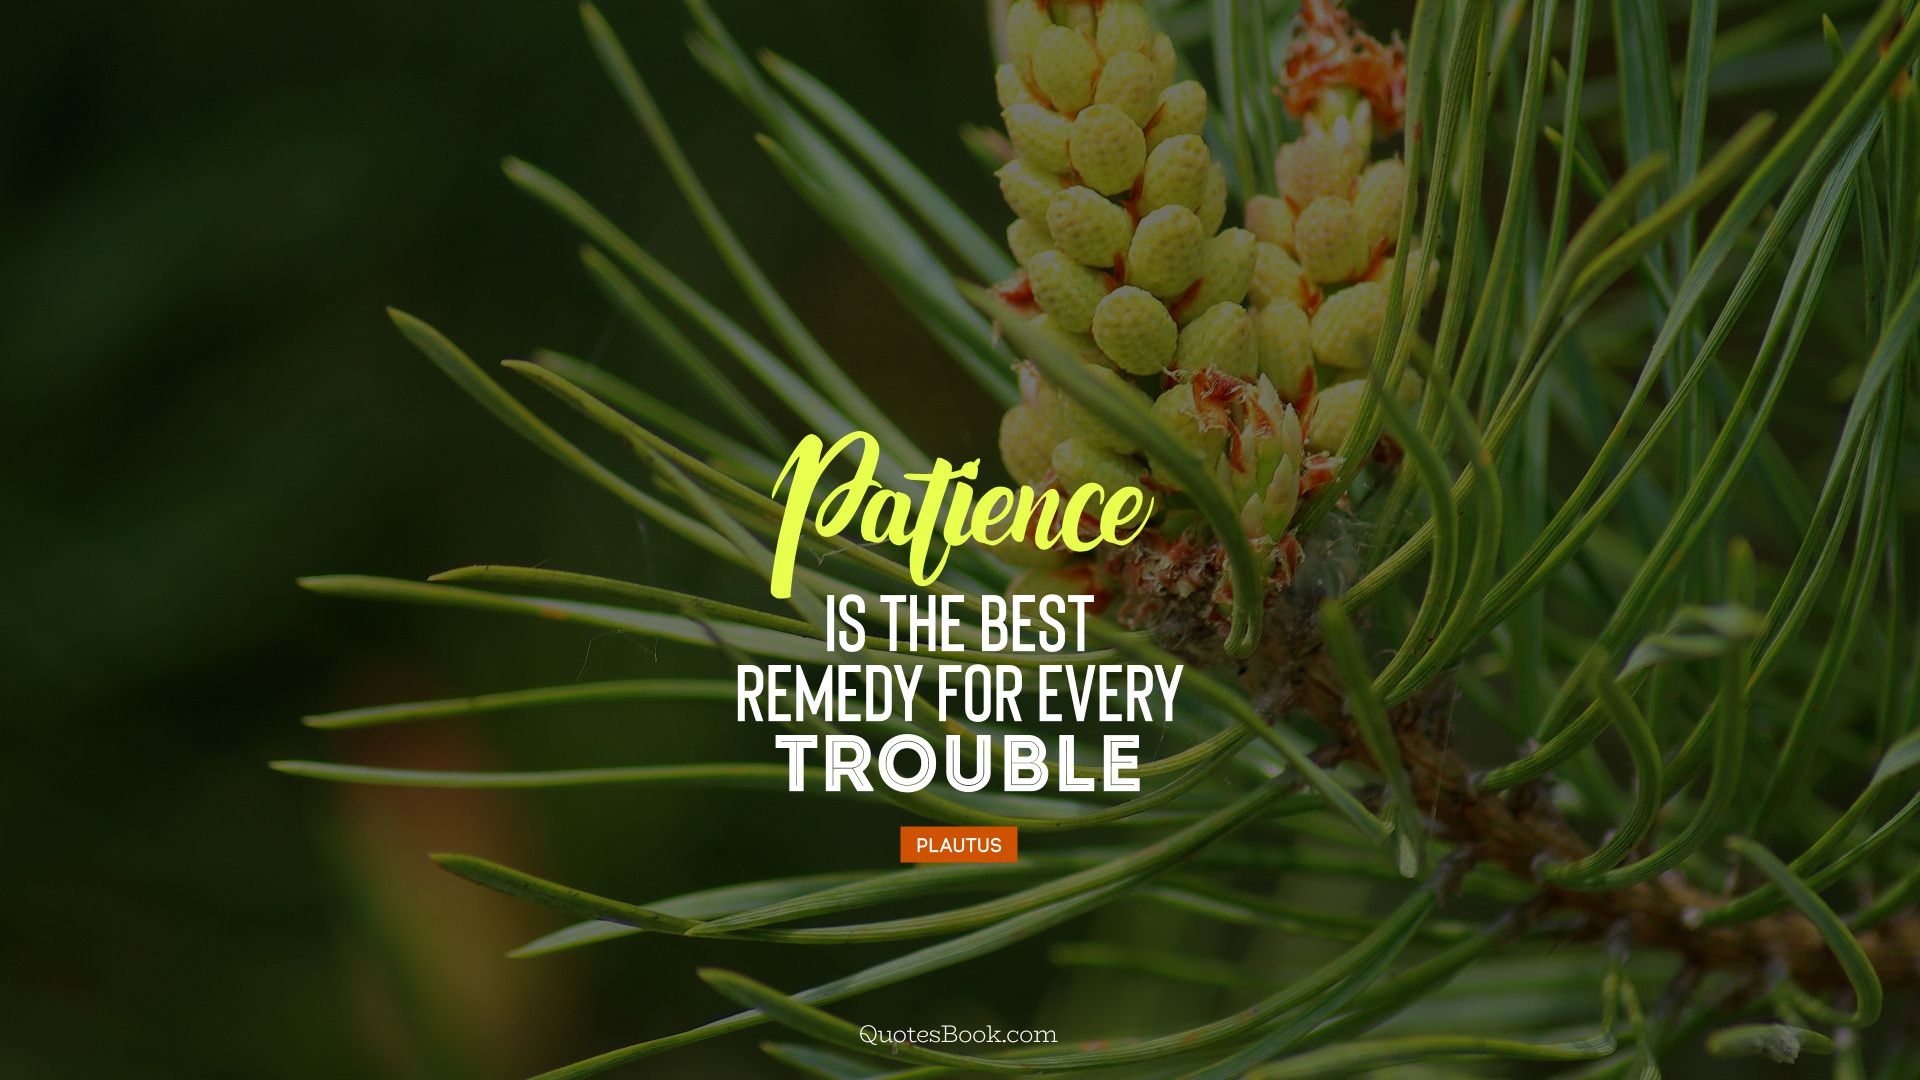 Patience is the best remedy for every trouble. - Quote by Plautus